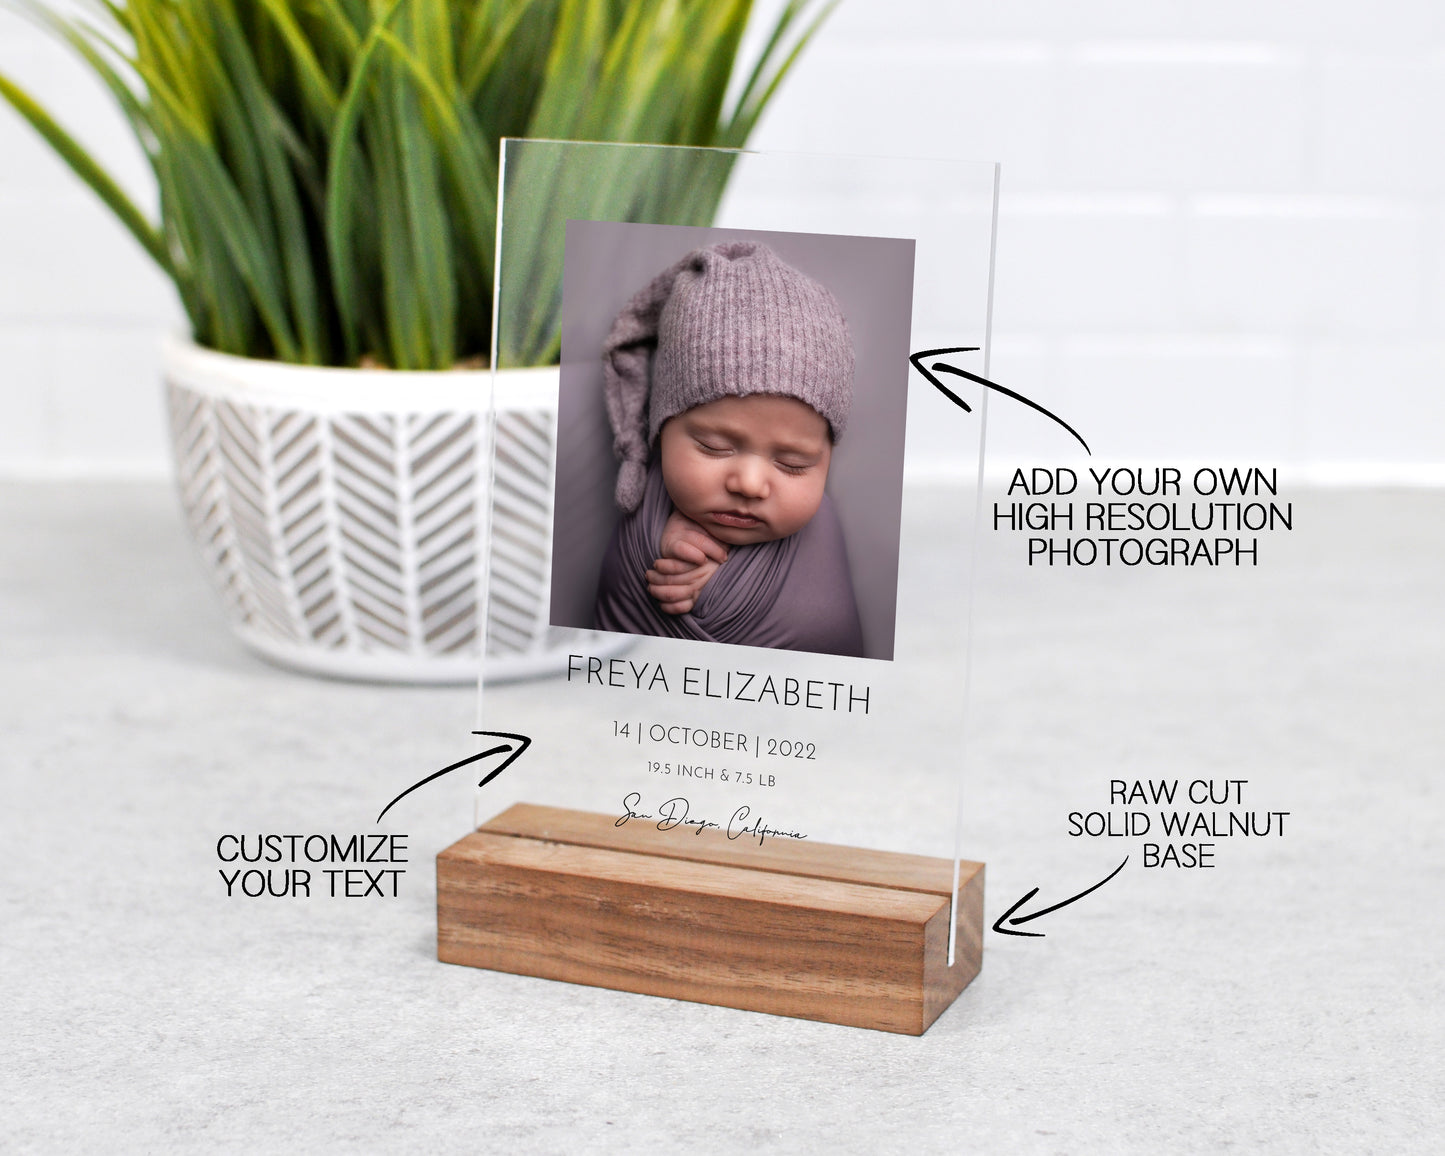 customize your text, add your own high resolution photo, add optional raw cut solid walnut base